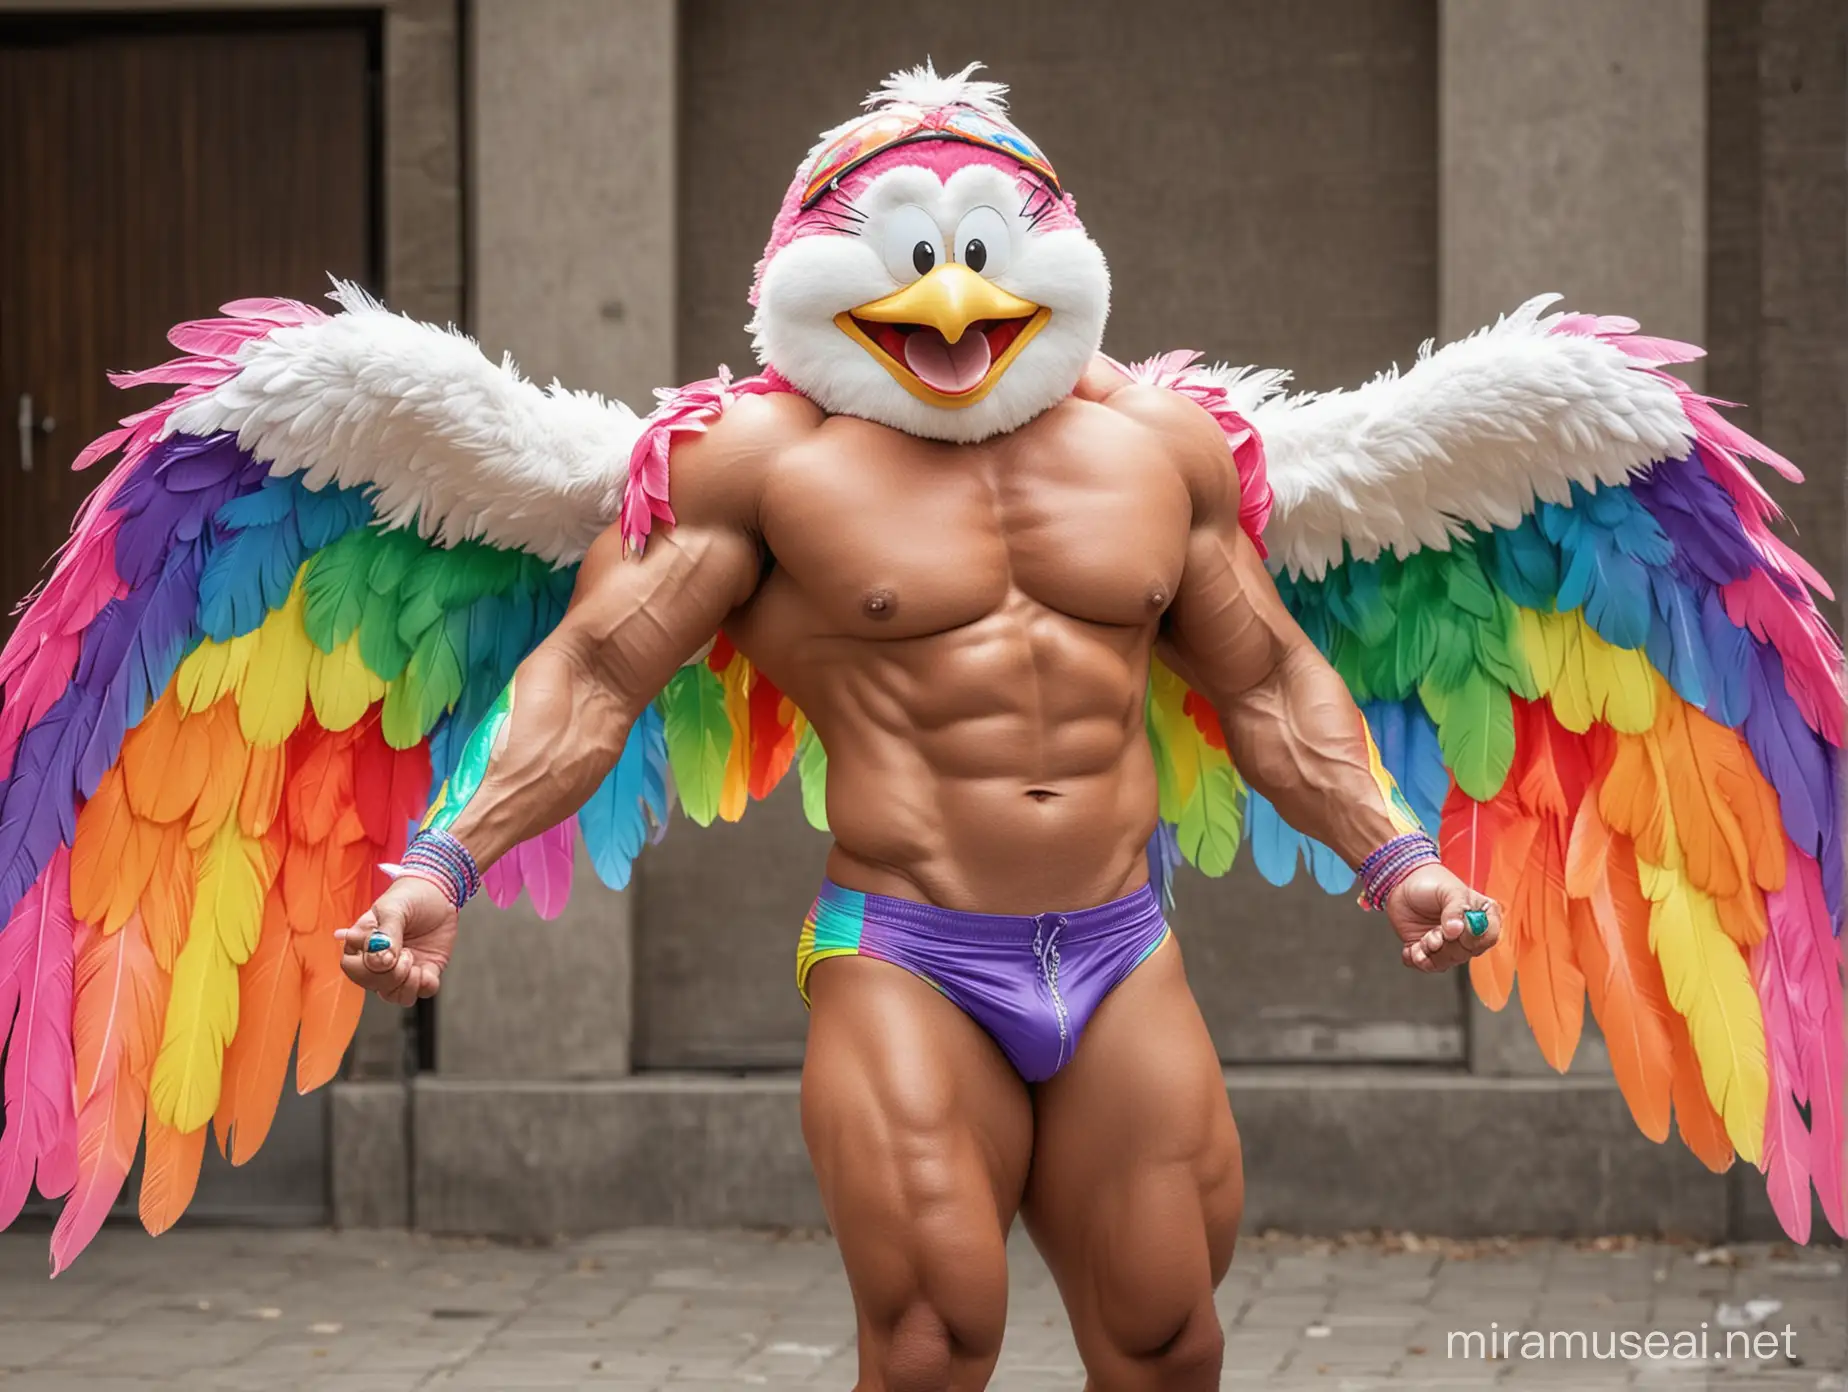 Happy Topless 30s Ultra Beefy IFBB Bodybuilder Man wearing Multi-Highlighter Bright Rainbow Coloured See Through Big Eagle Wings shoulder Jacket short shorts and Flexing Big Strong Arm with Doraemon